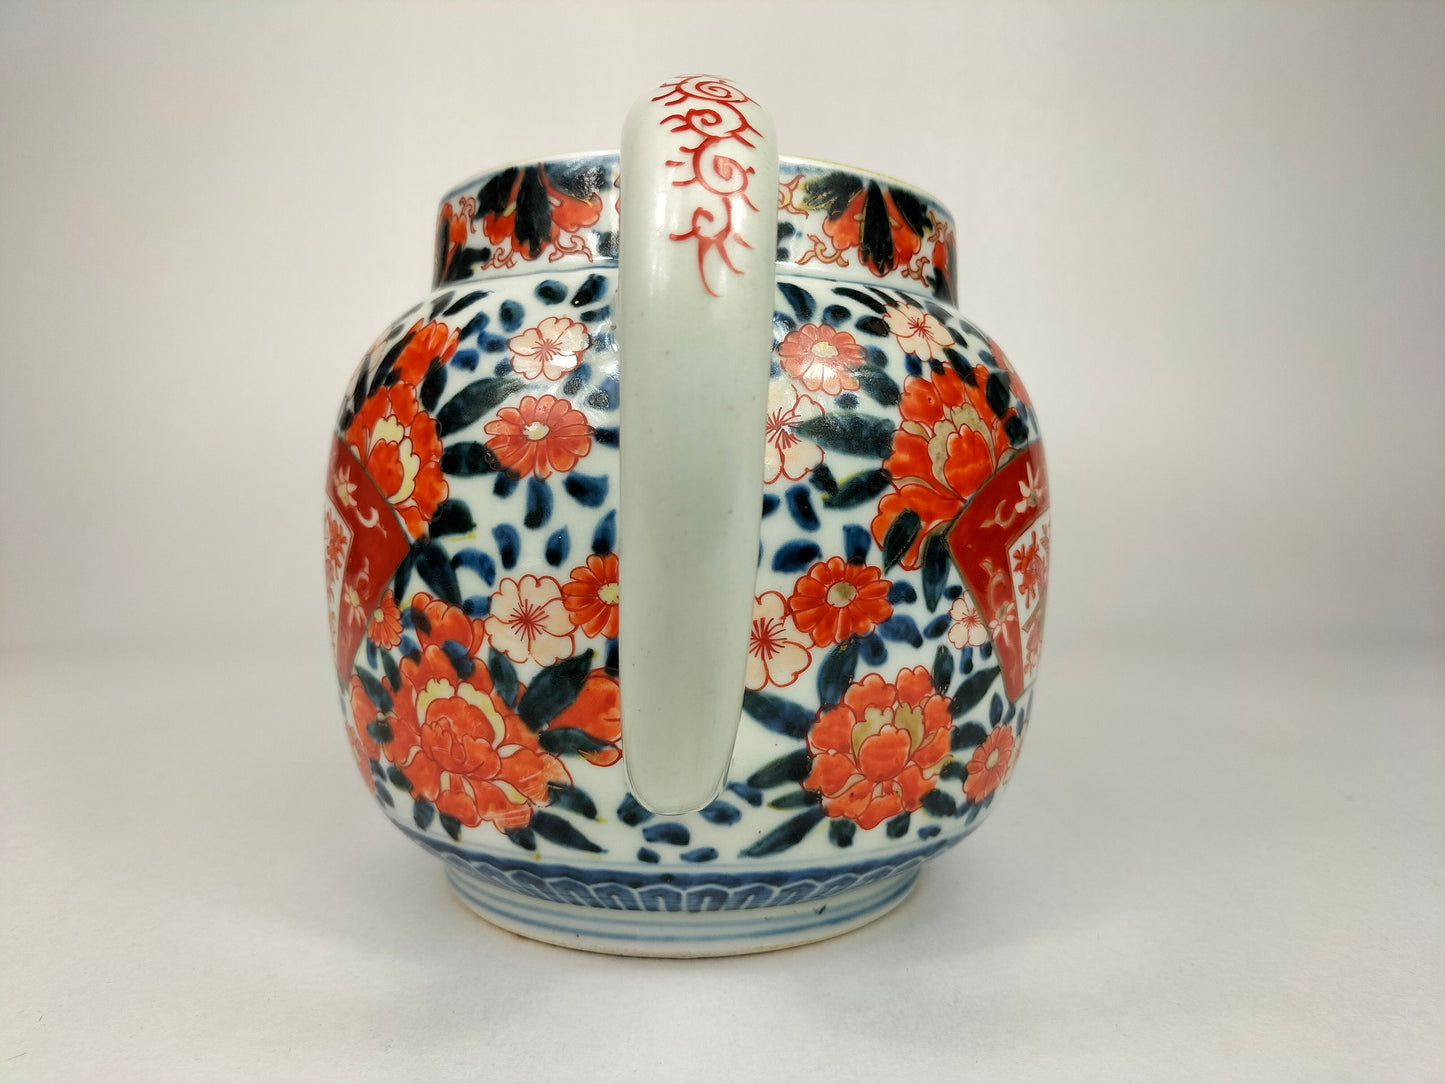 Large antique Japanese imari pitcher decorated with floral motifs // Meiji Period - 19th century